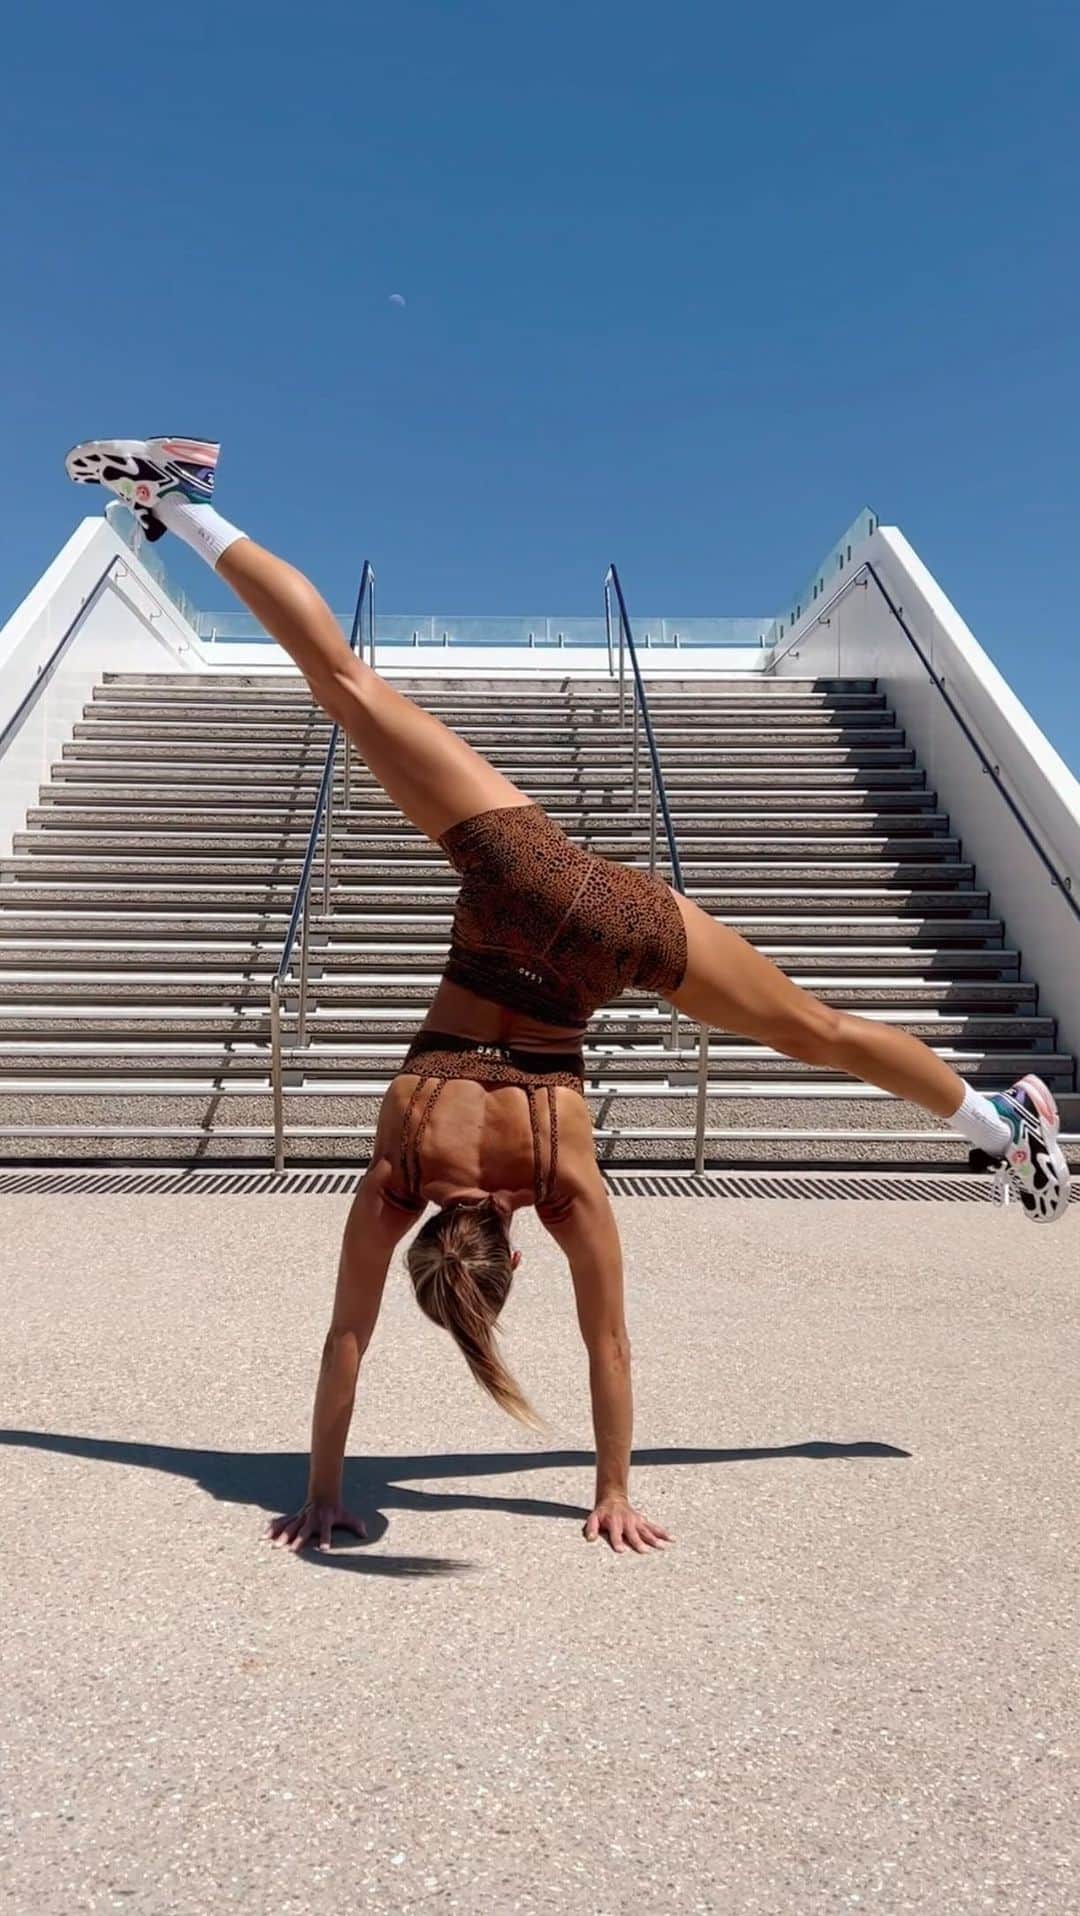 Amanda Biskのインスタグラム：「Life’s better upside down 🤸🏽 #handstand  If you’ve ever wanted to learn how to handstand on your own, I’ve got you! My ‘Get Your Handstand’ 4 part workshop on #freshbodyfitmind app has everything you need, in bite size, easy to follow steps 🙌🏼 Tutorials, tips, specific handstand strength building workouts & testing exercises to help you every step of the way…no matter what level you are starting at! 😊 Find it under ‘PROGRAMS’ ❤️‍🔥  Wearing: @lskd 🤎 AMANDA15 for 15% off!」